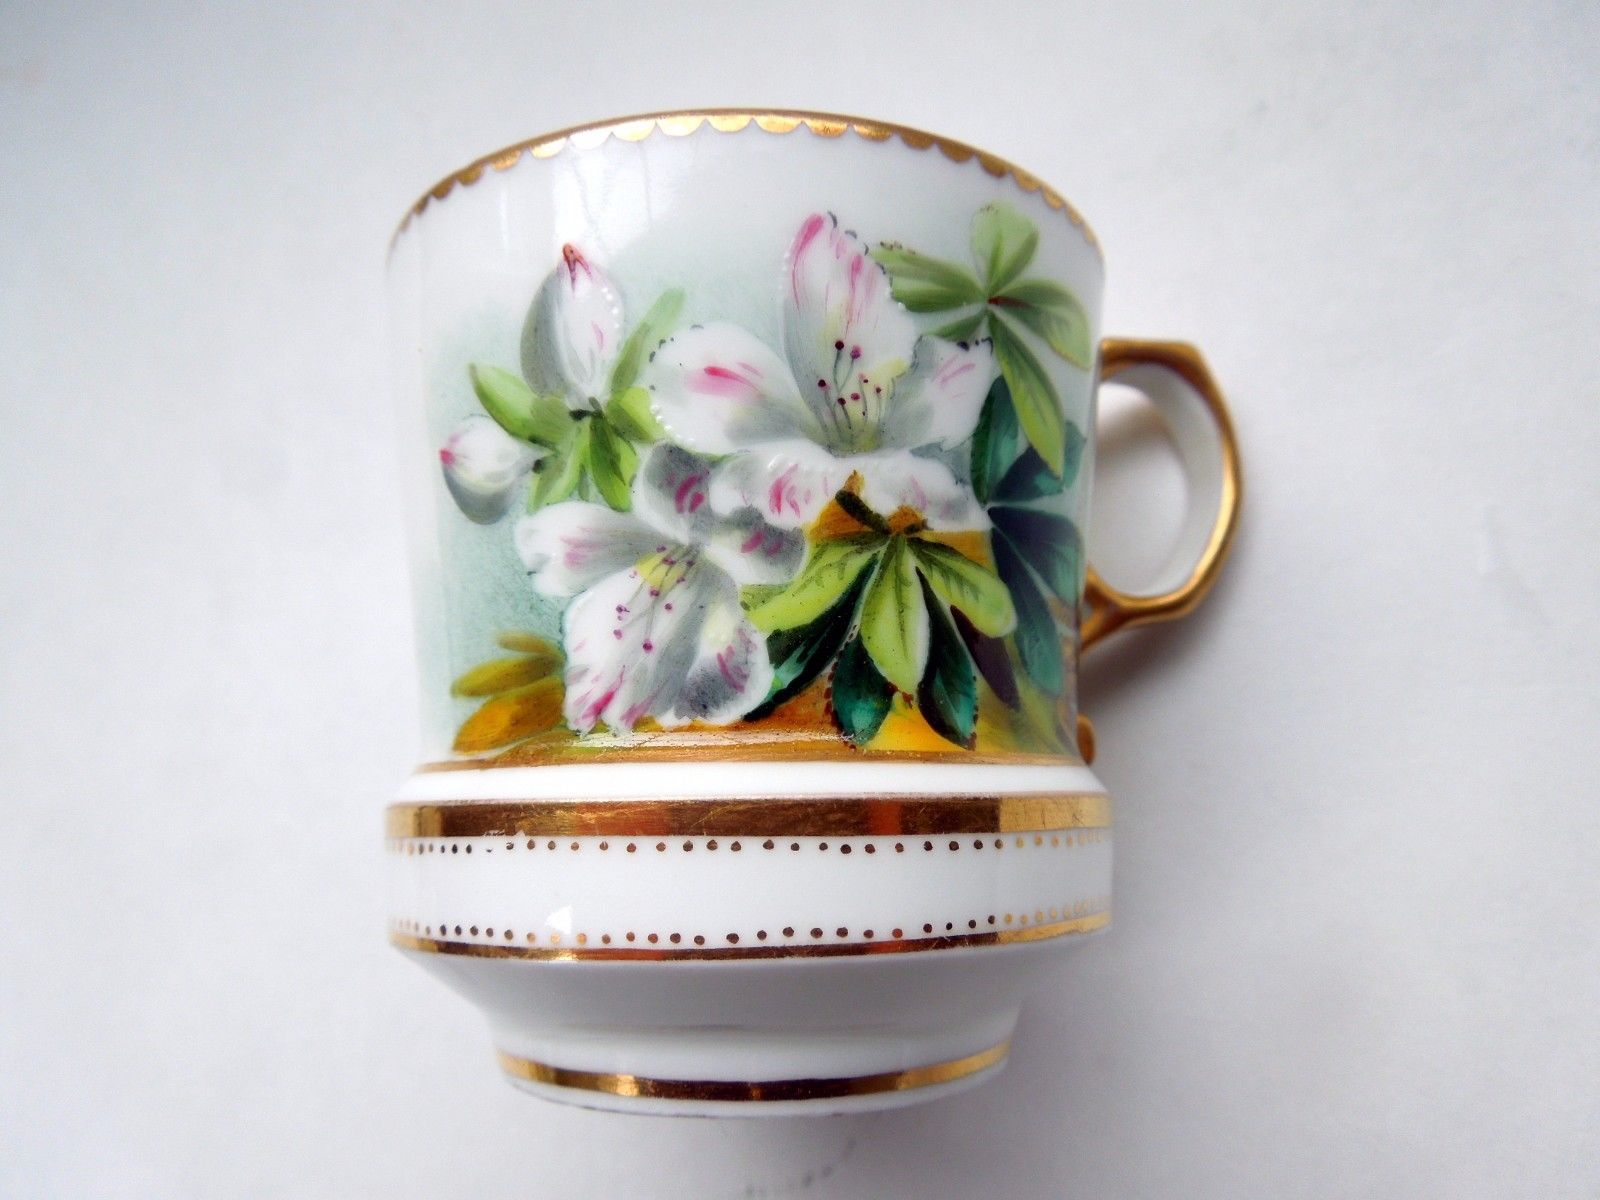 Antique Cup No Saucer George Jones White Flowers Floral Hand Painted Gold